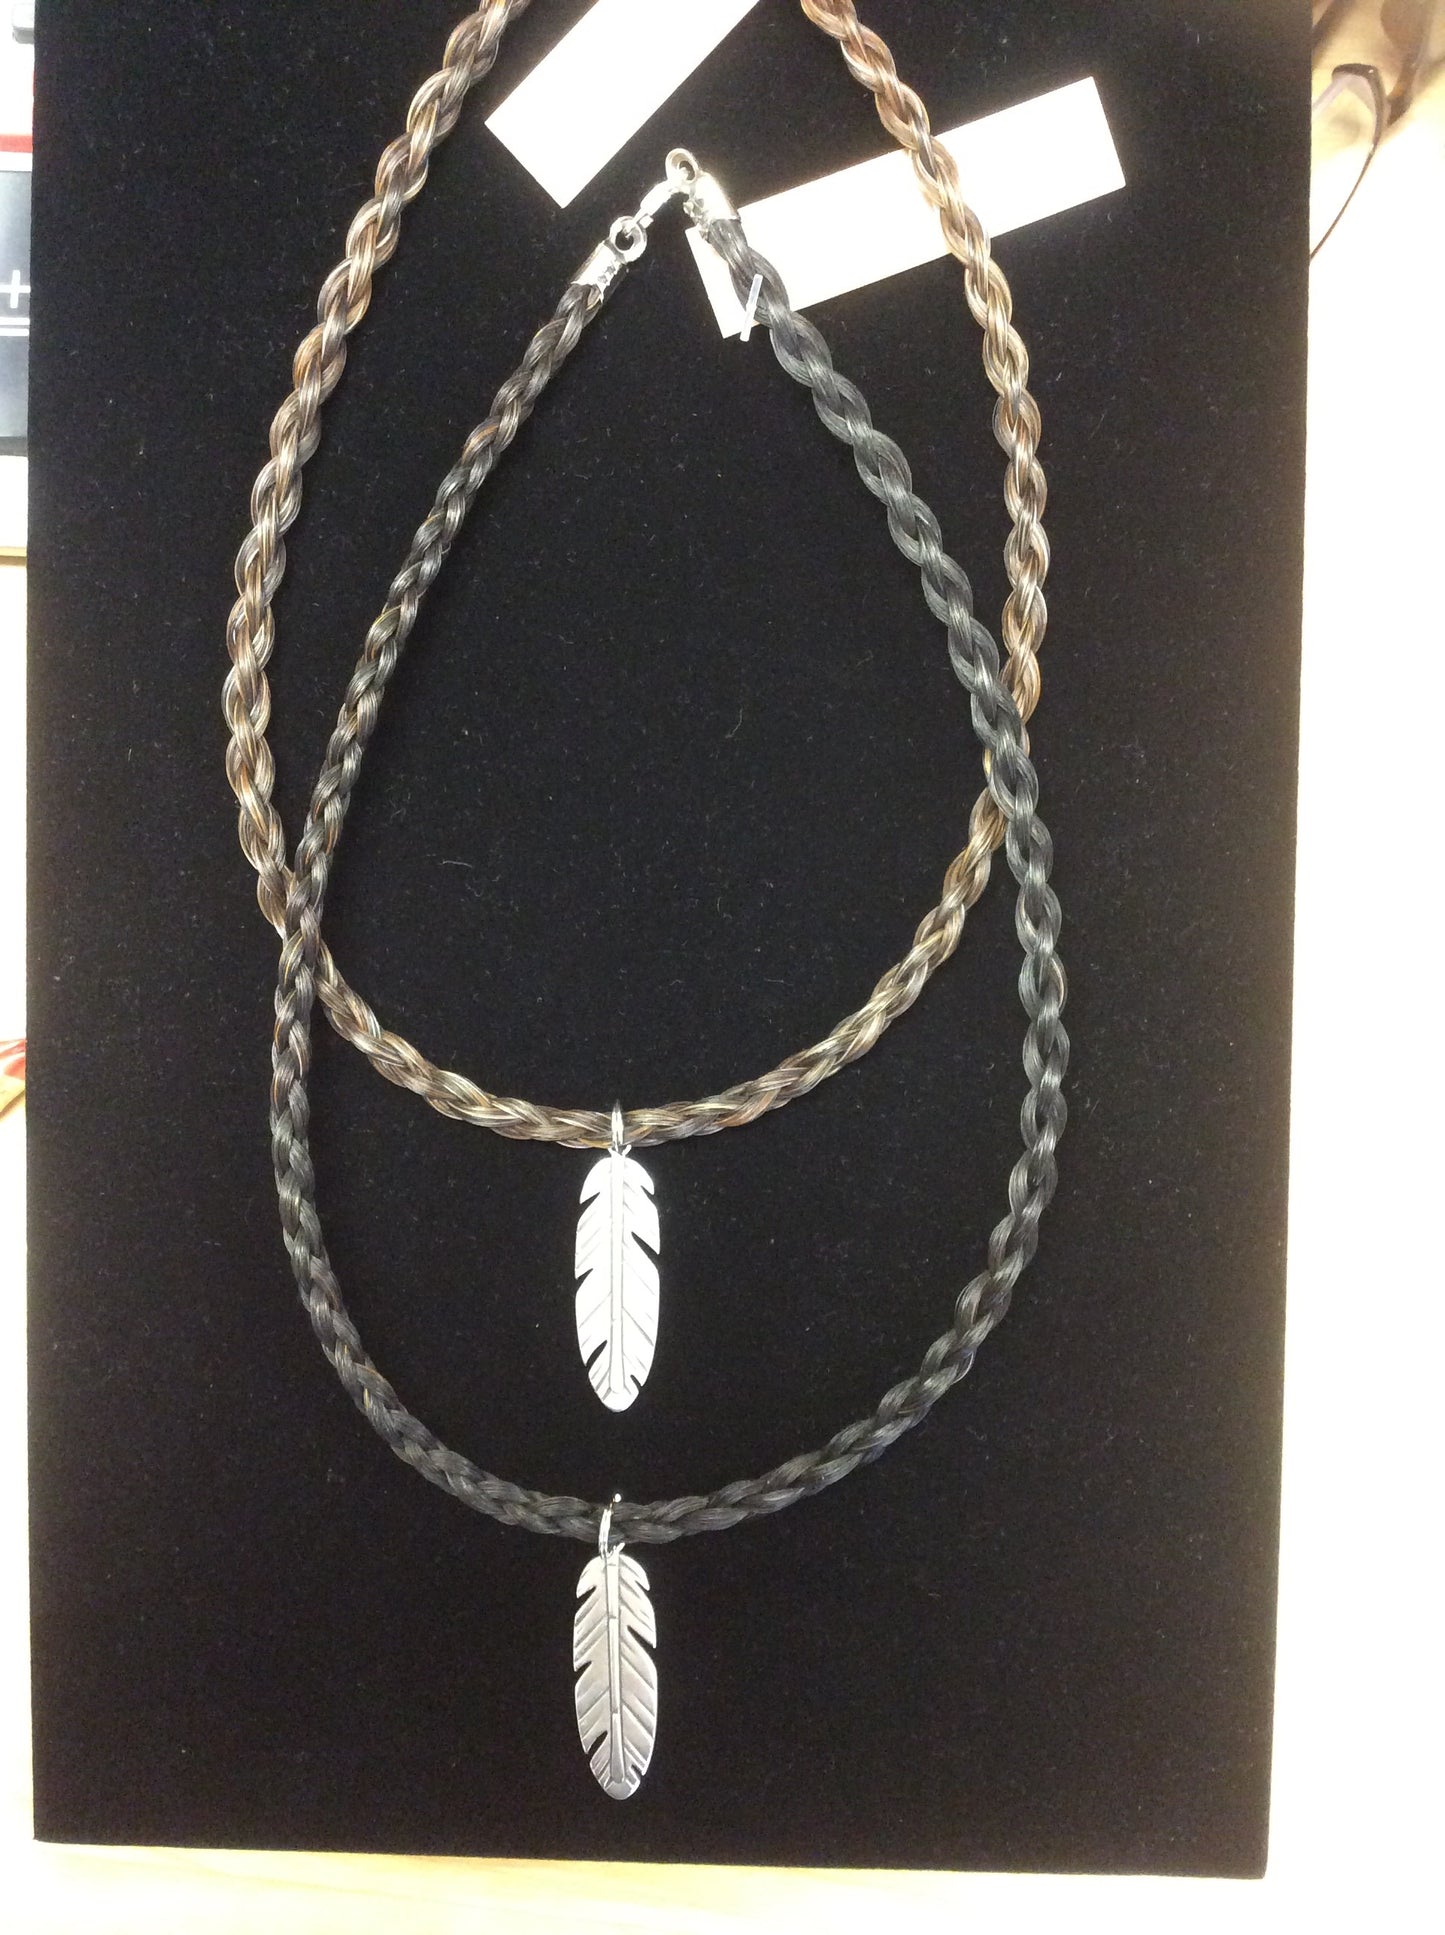 Horse Hair Necklace with Feather charm